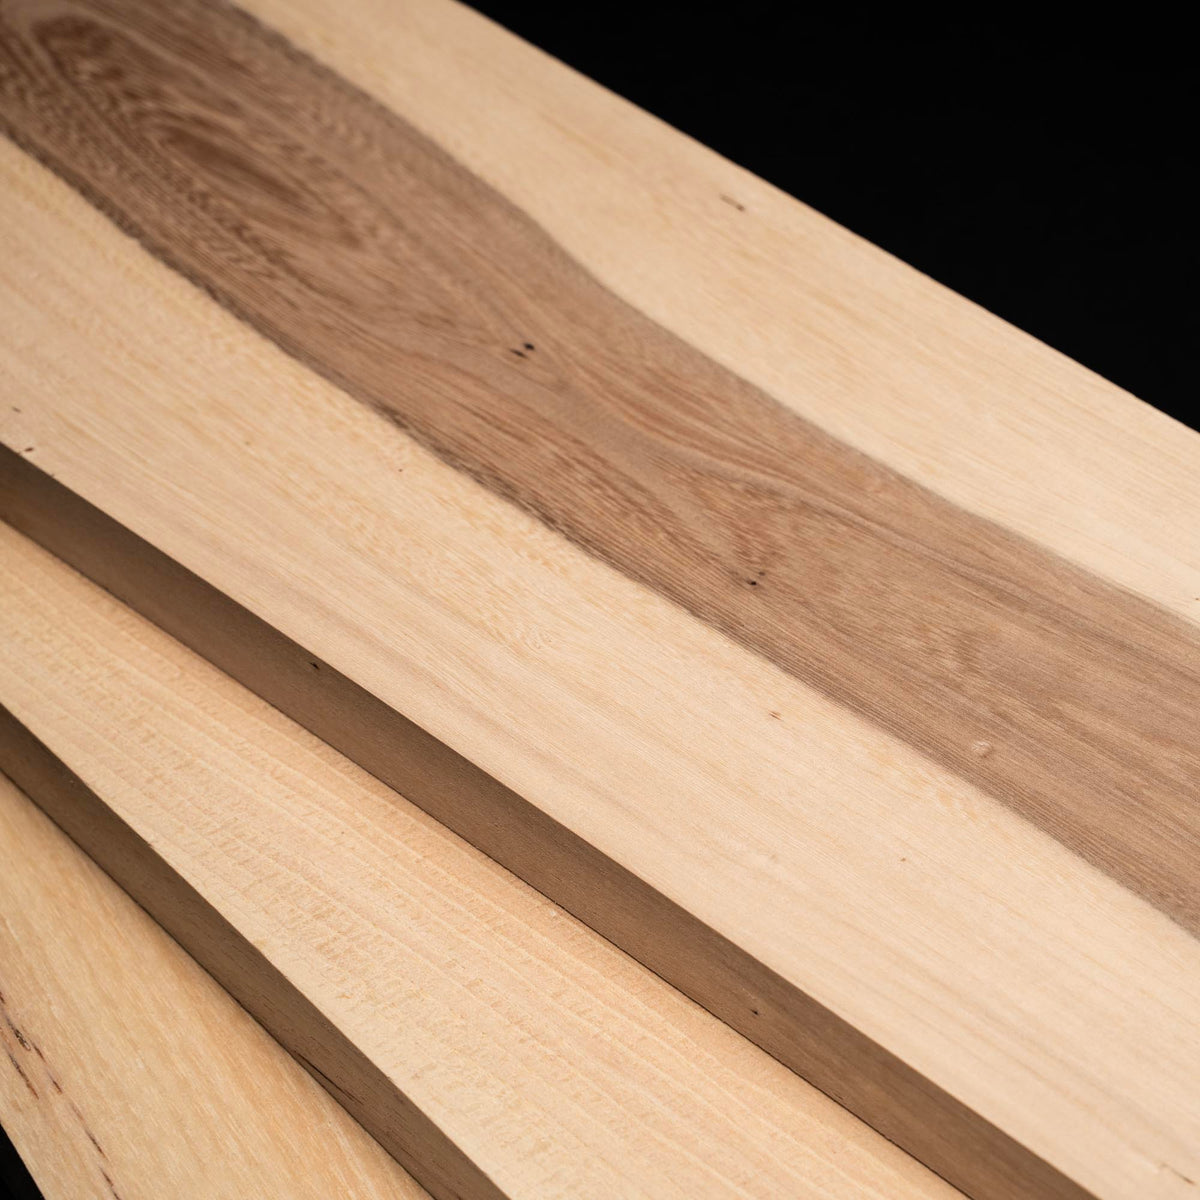 4/4 1” Hickory Boards - Kiln Dried Dimensional Lumber - Cut to Size Hickory Board